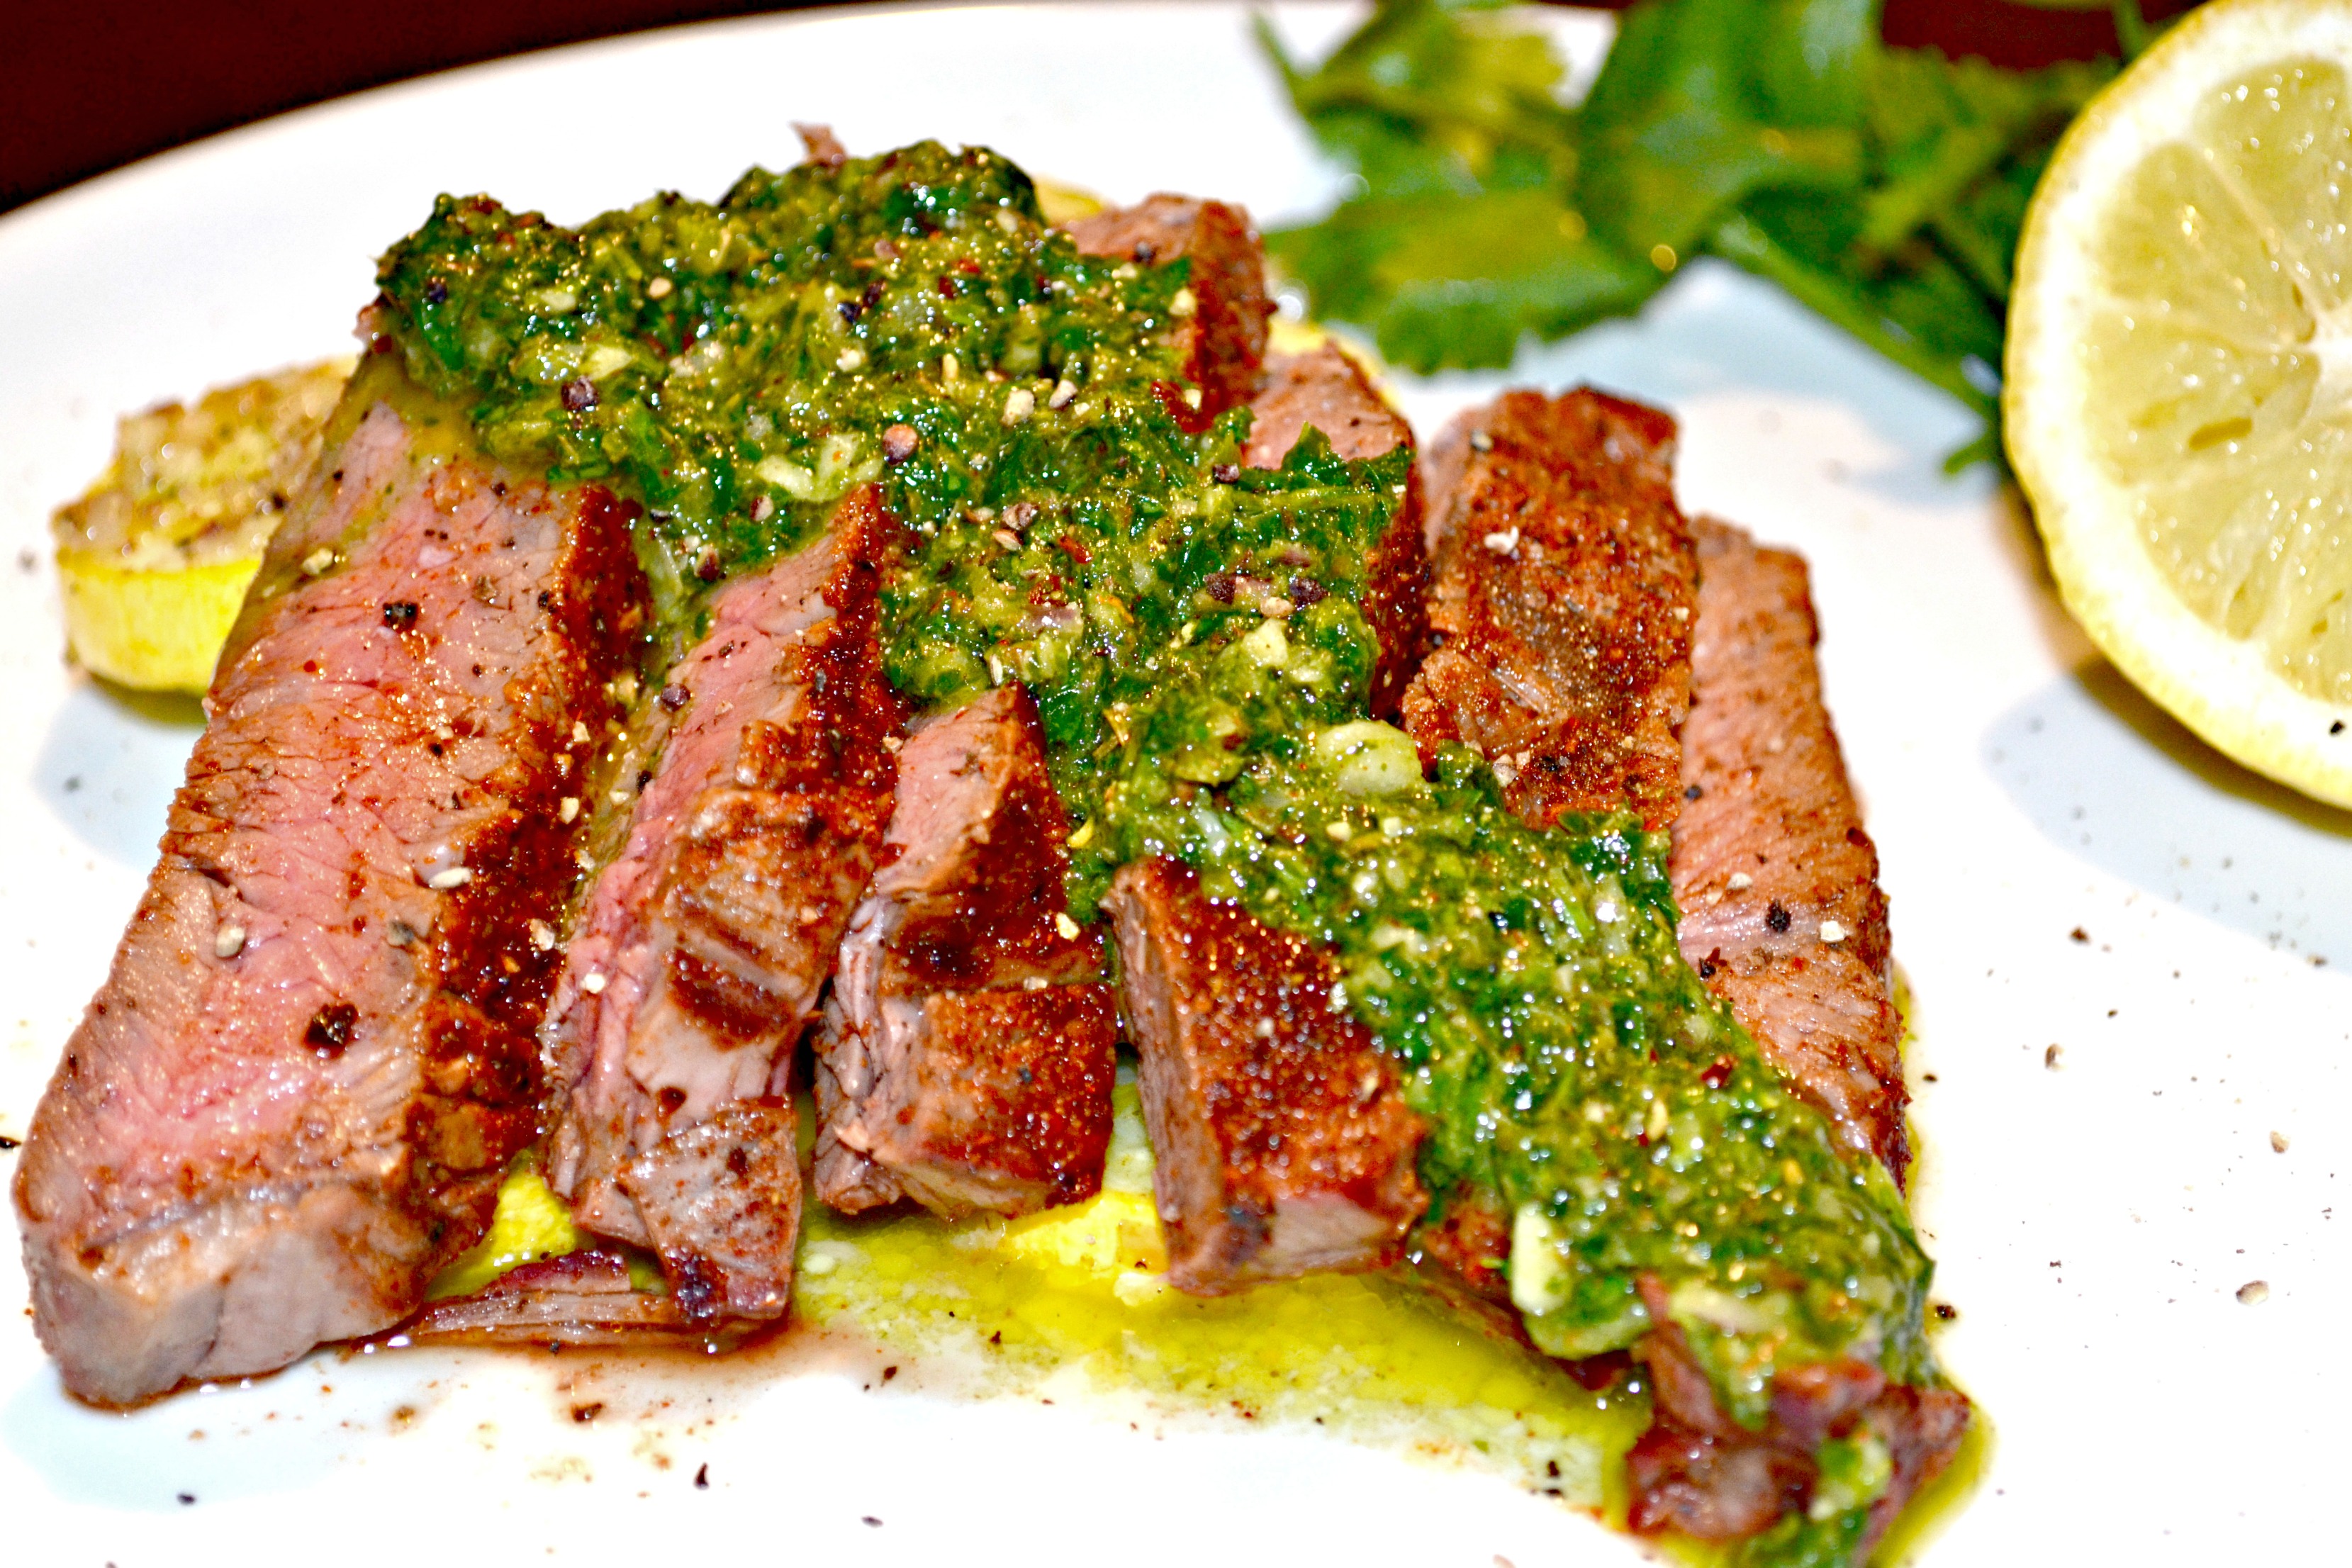 Spice Rubbed Steak With Chimichurri Sauce A Hint Of Wine